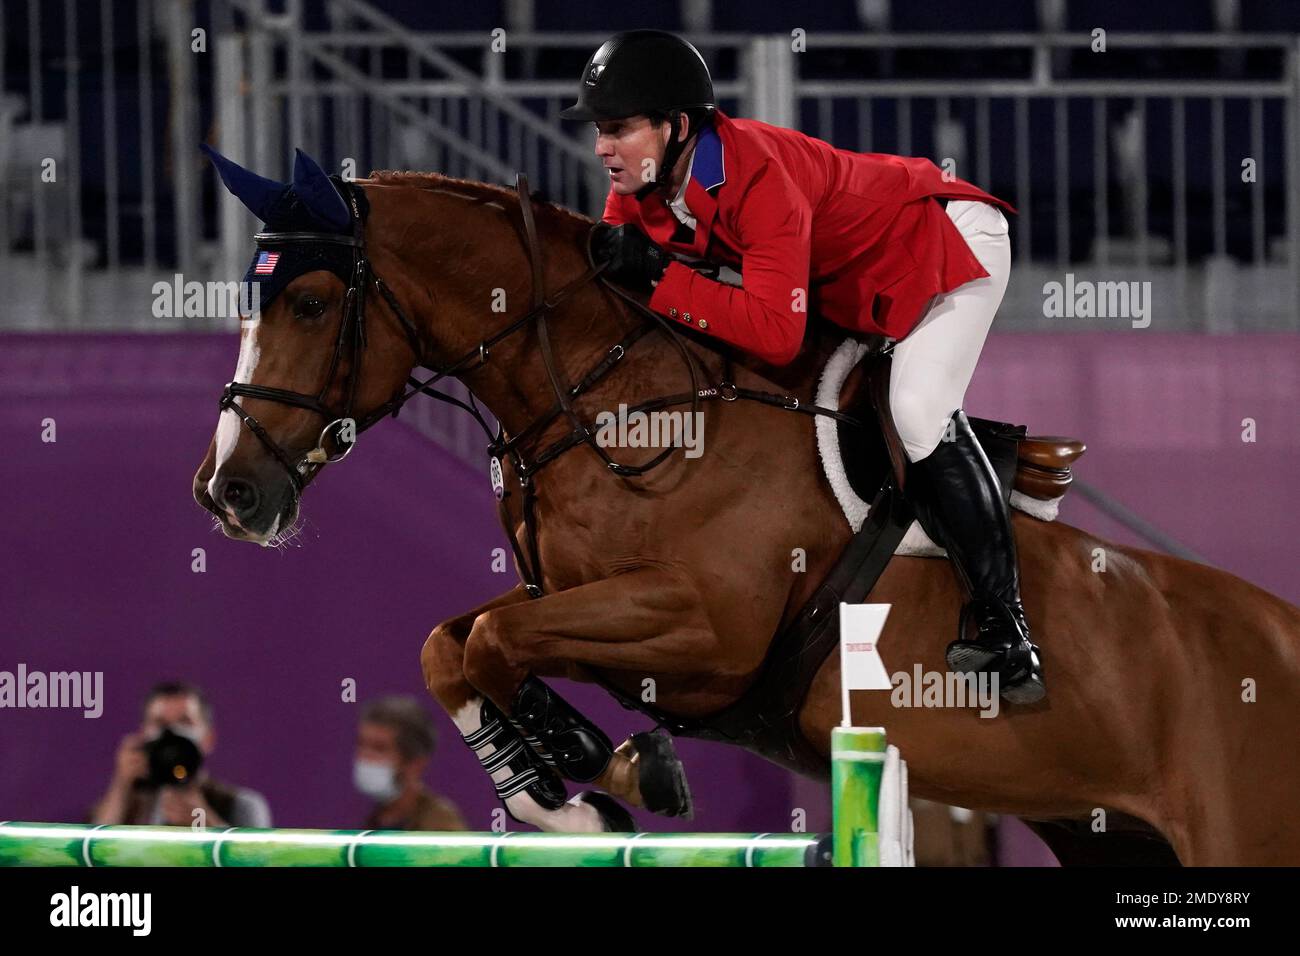 United States McLain Ward, riding Contagious, competes during the equestrian jumping team final at Equestrian Park